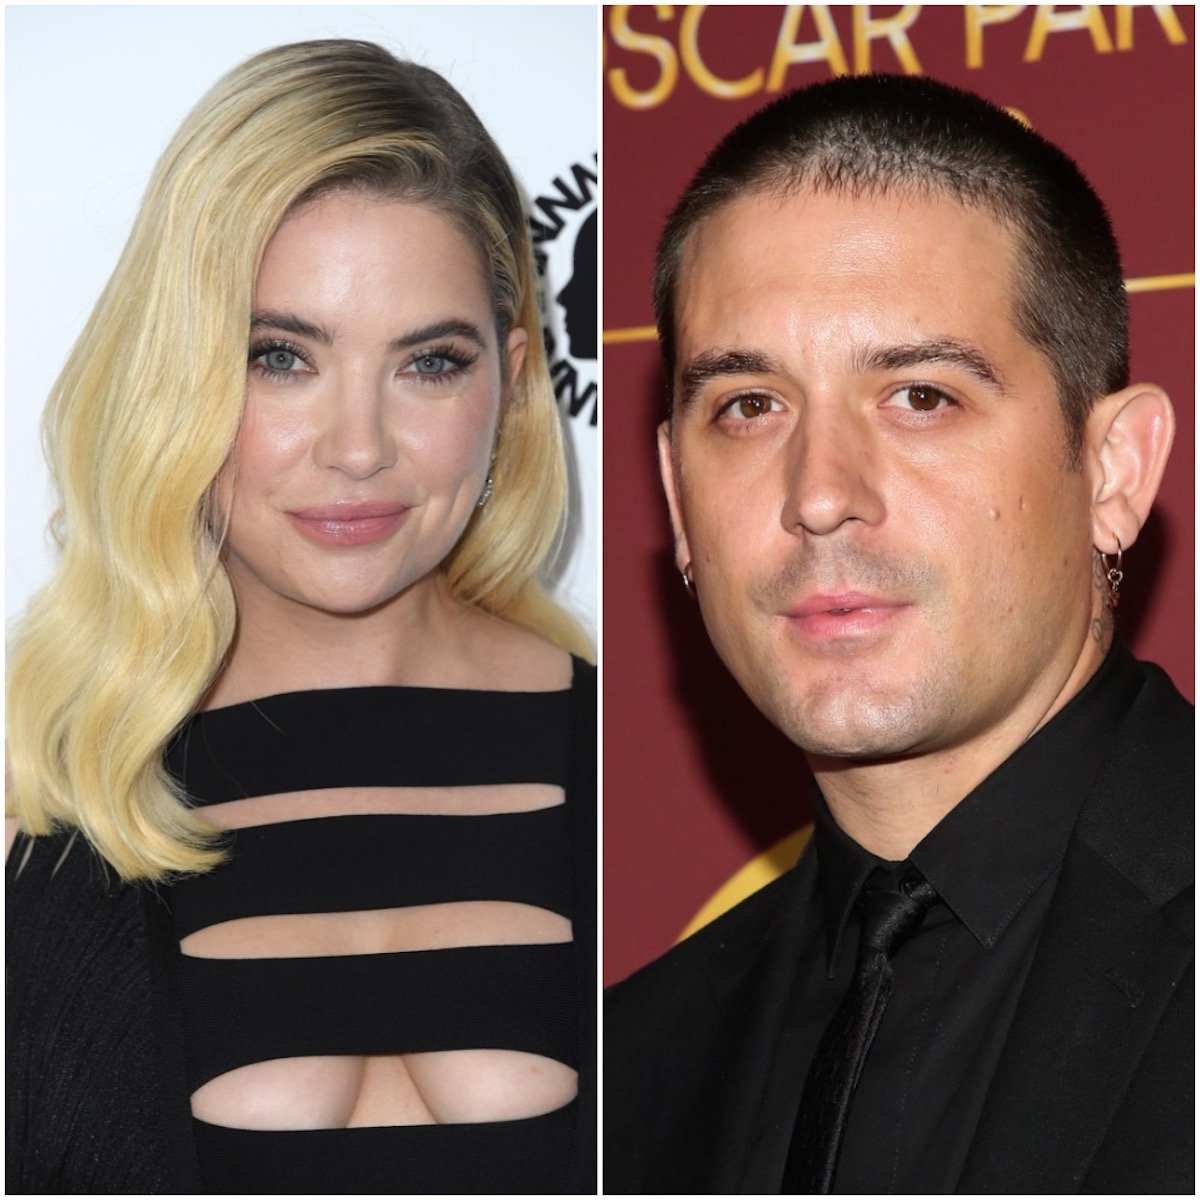 Side by side photos of Ashley Benson and G-Eazy.